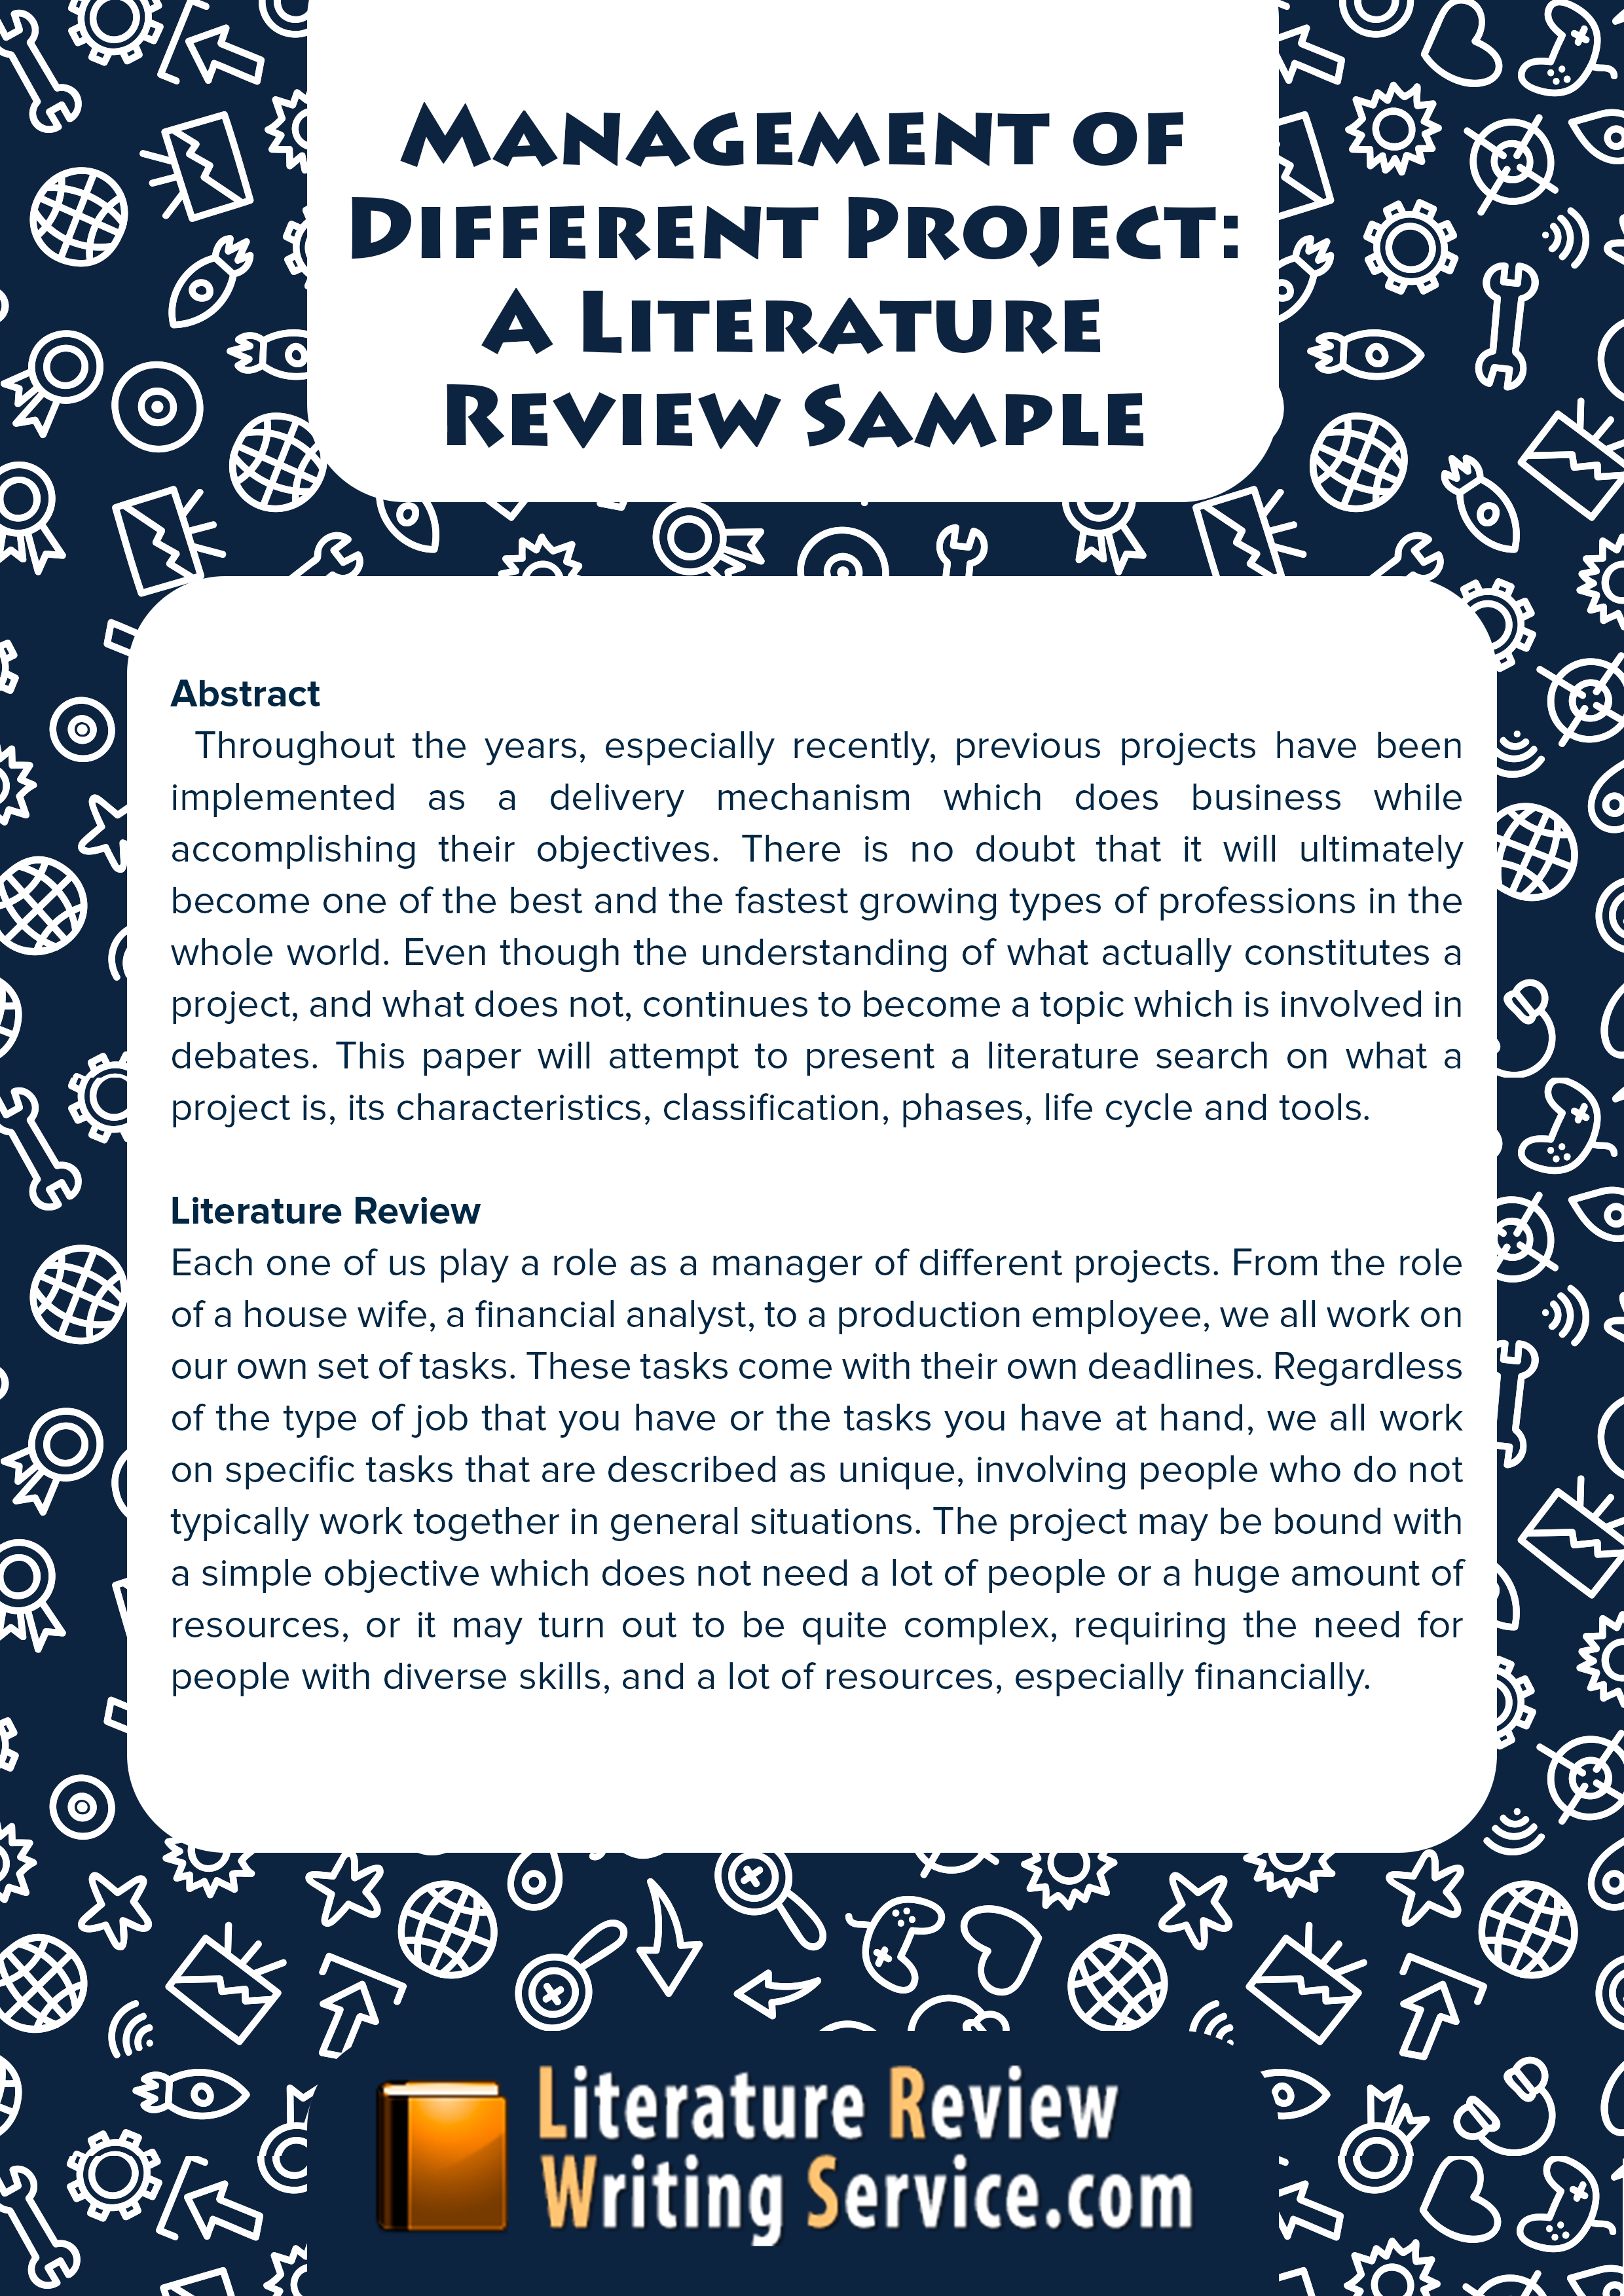 example of a literature review paper